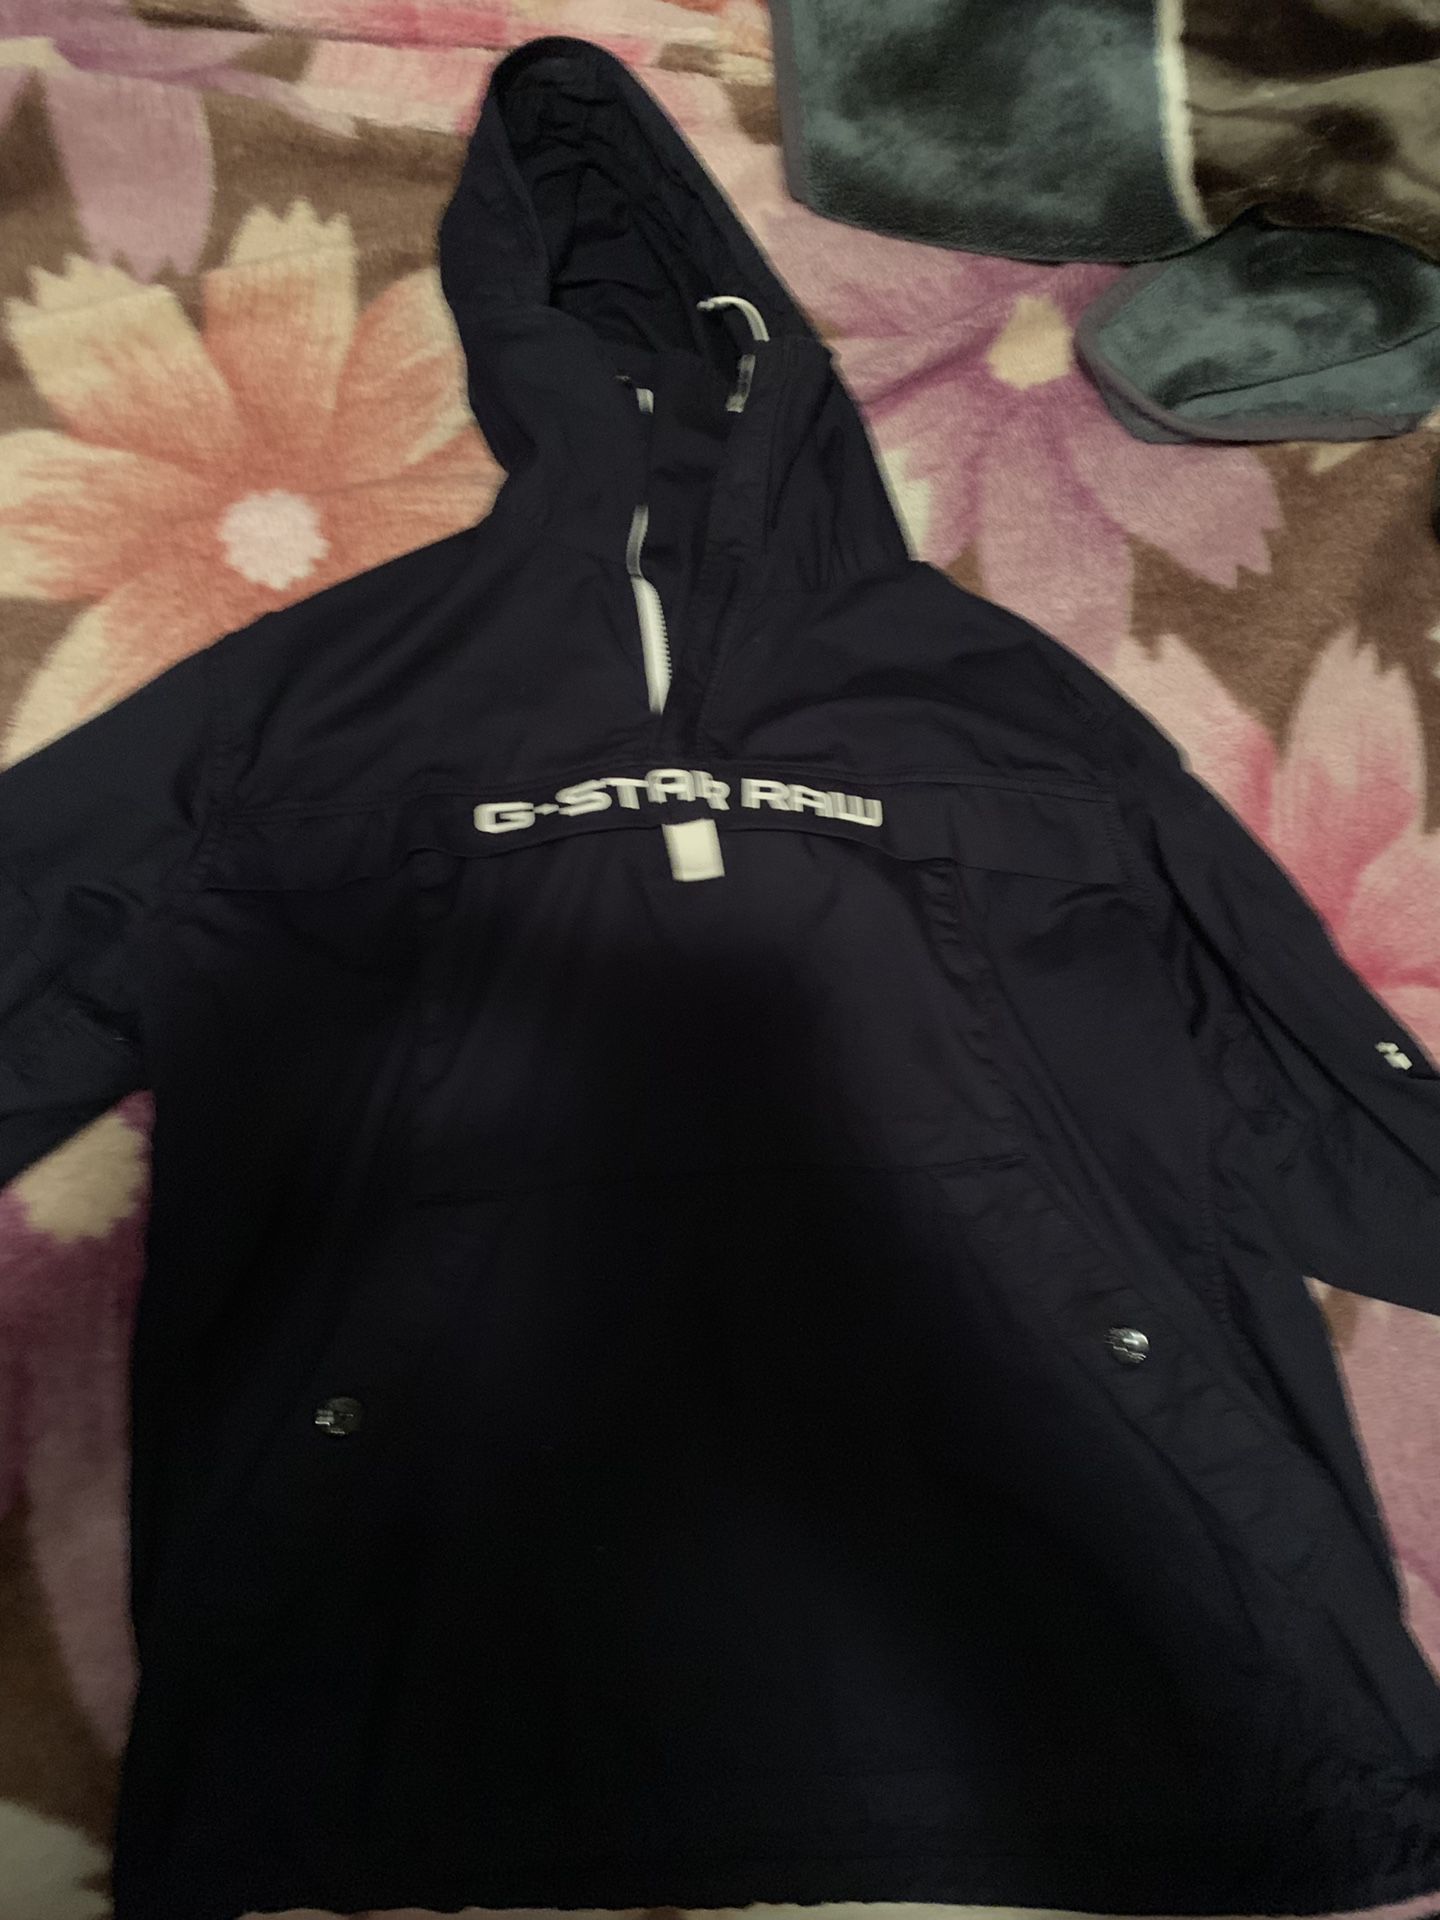 G star Deconstructed Hooded Anorak Jacket size L